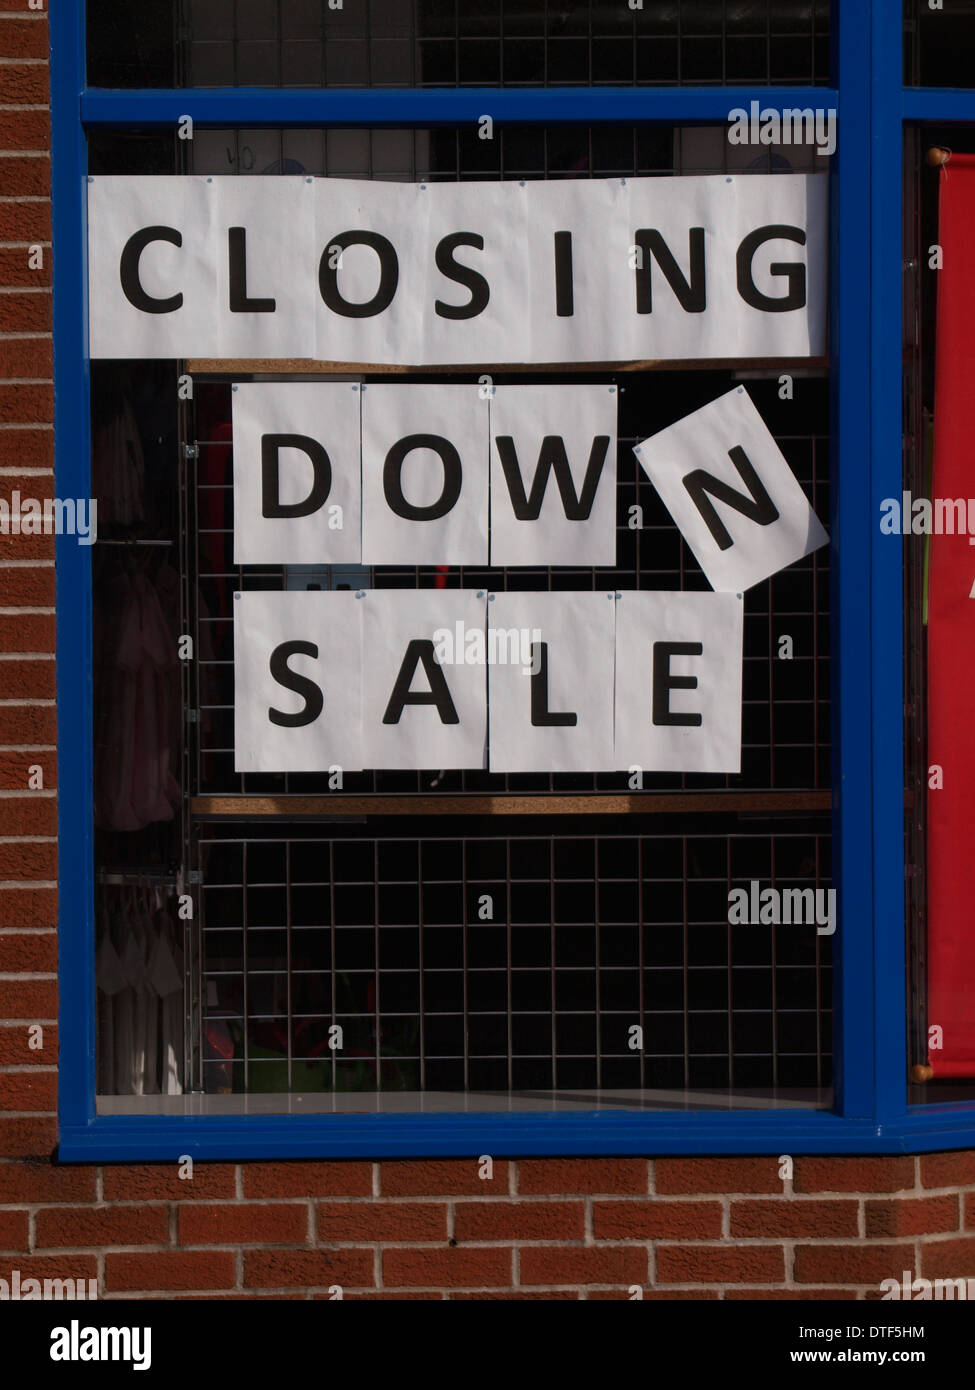 Closing down sale sign in a shop window Stock Photo